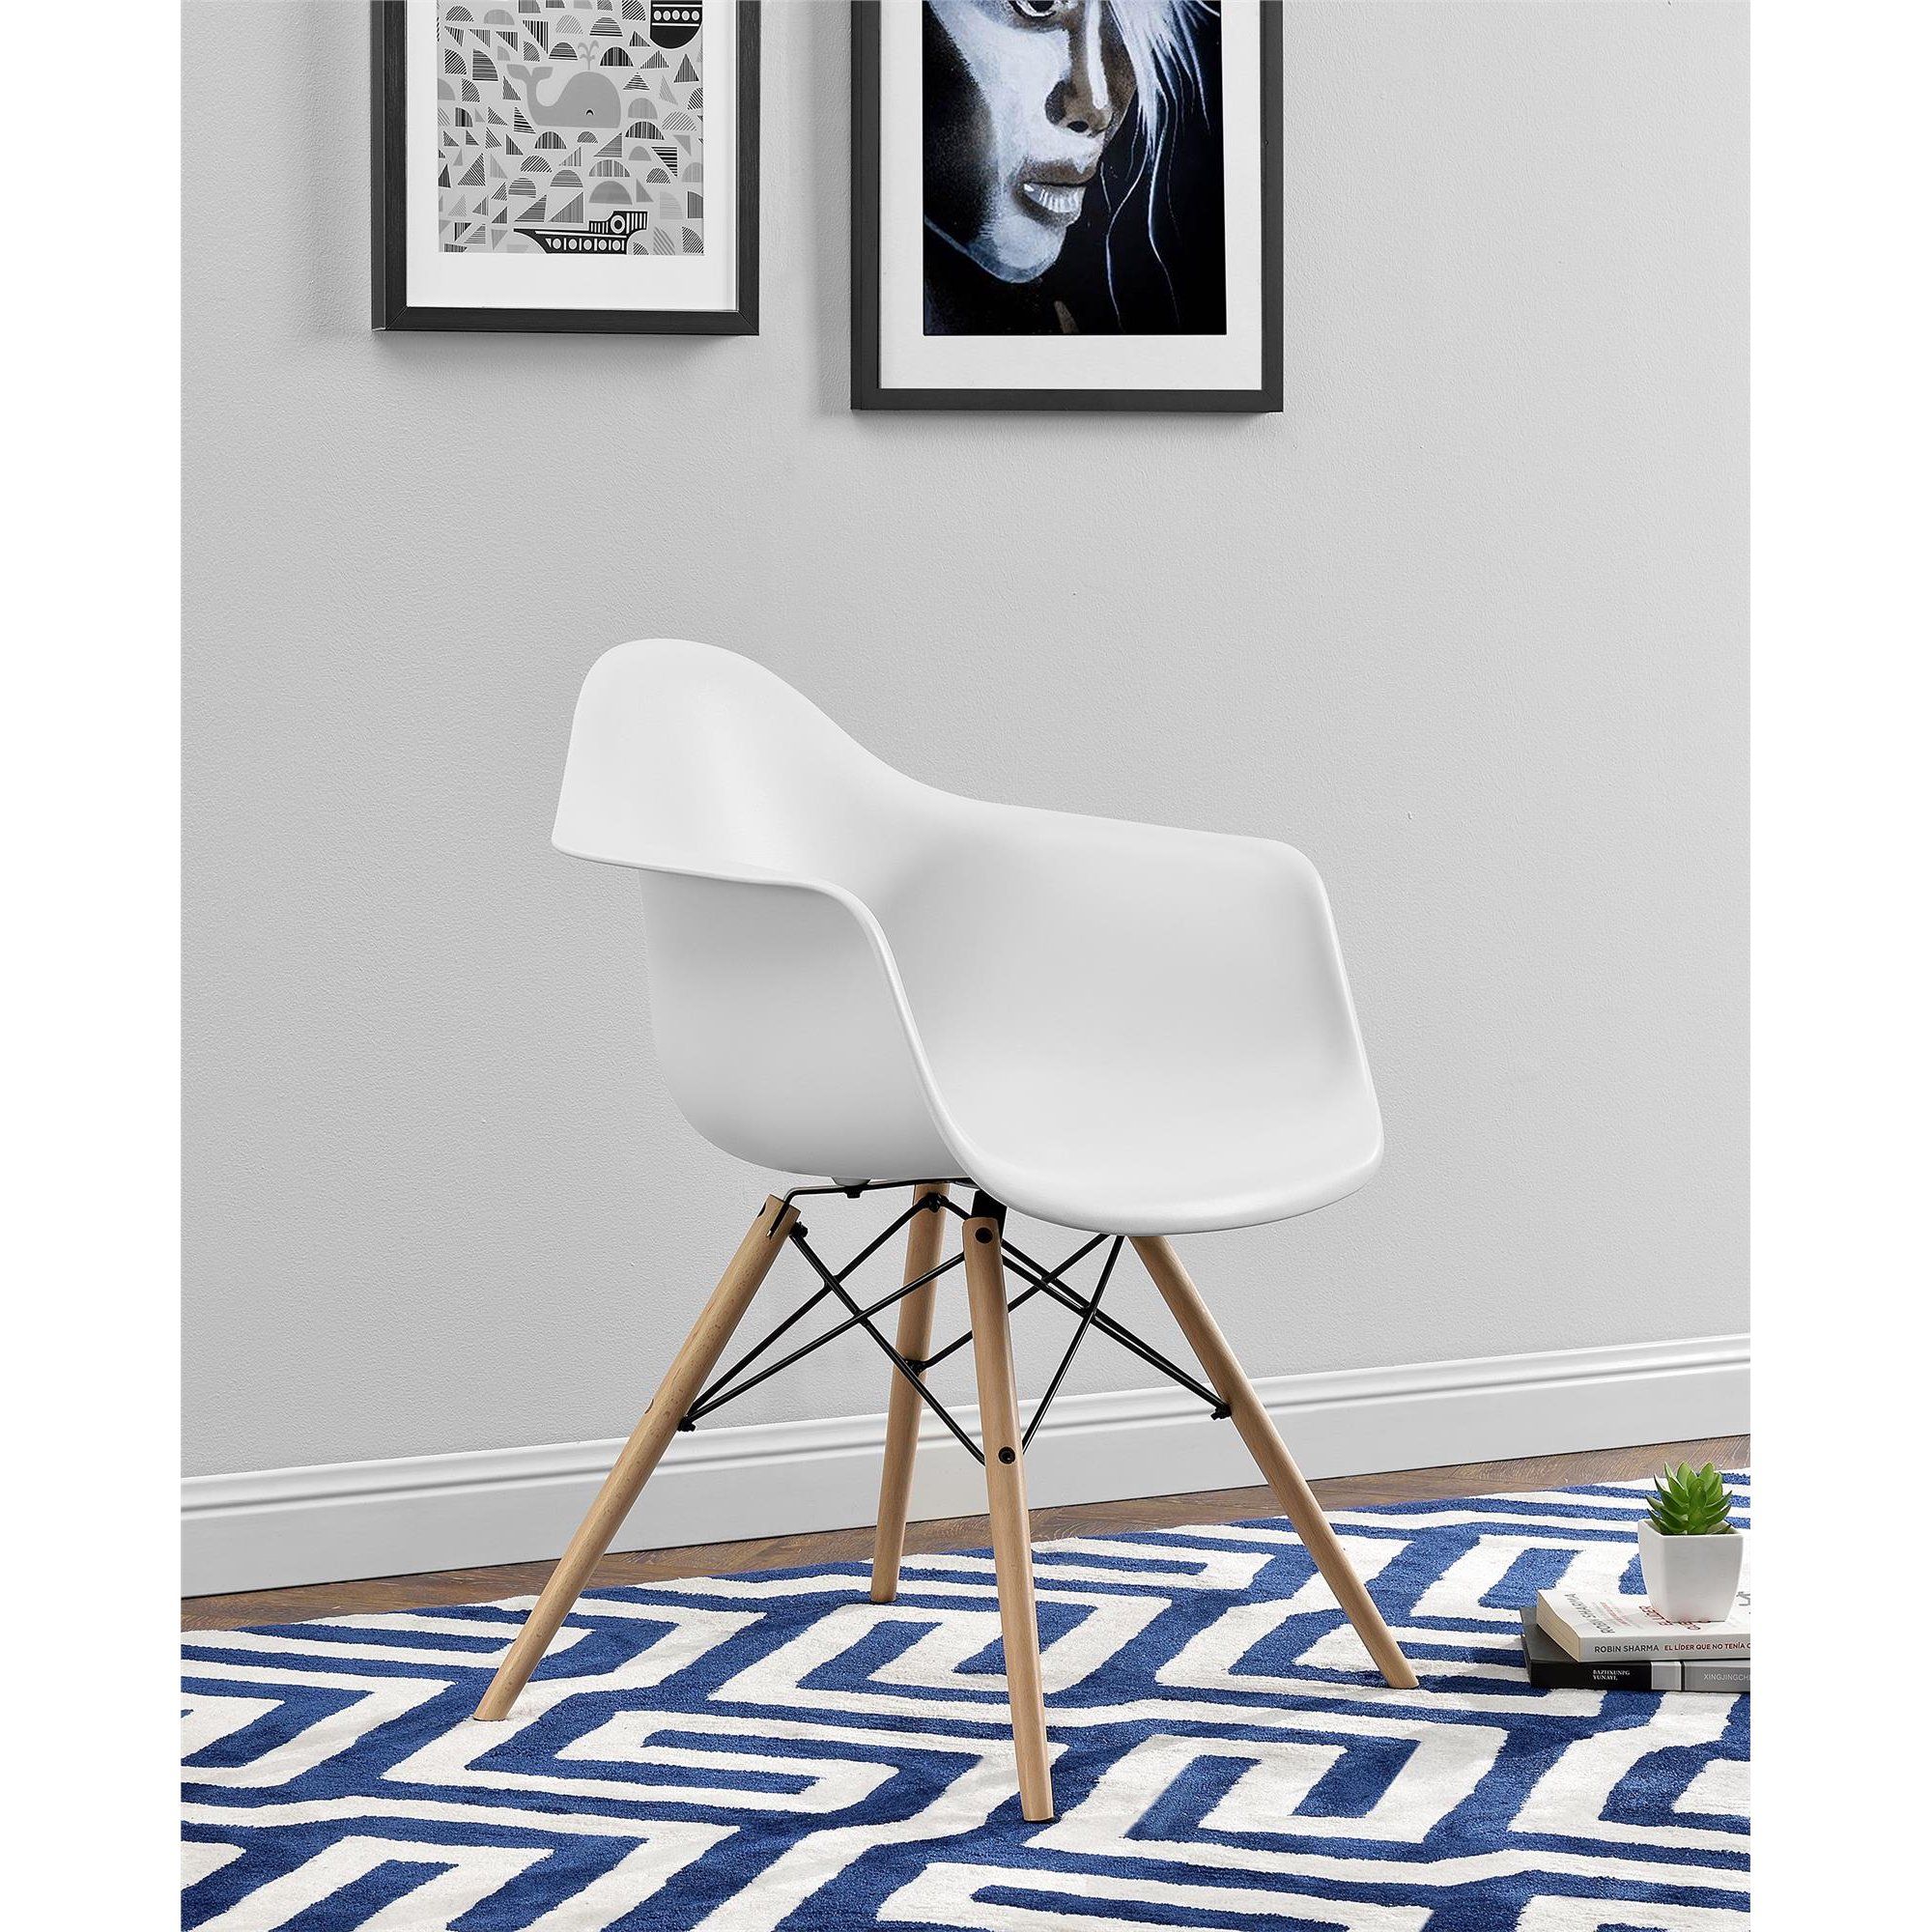 DHP Mid Century Modern Molded Arm Chair with Wood Leg - White | Walmart (US)